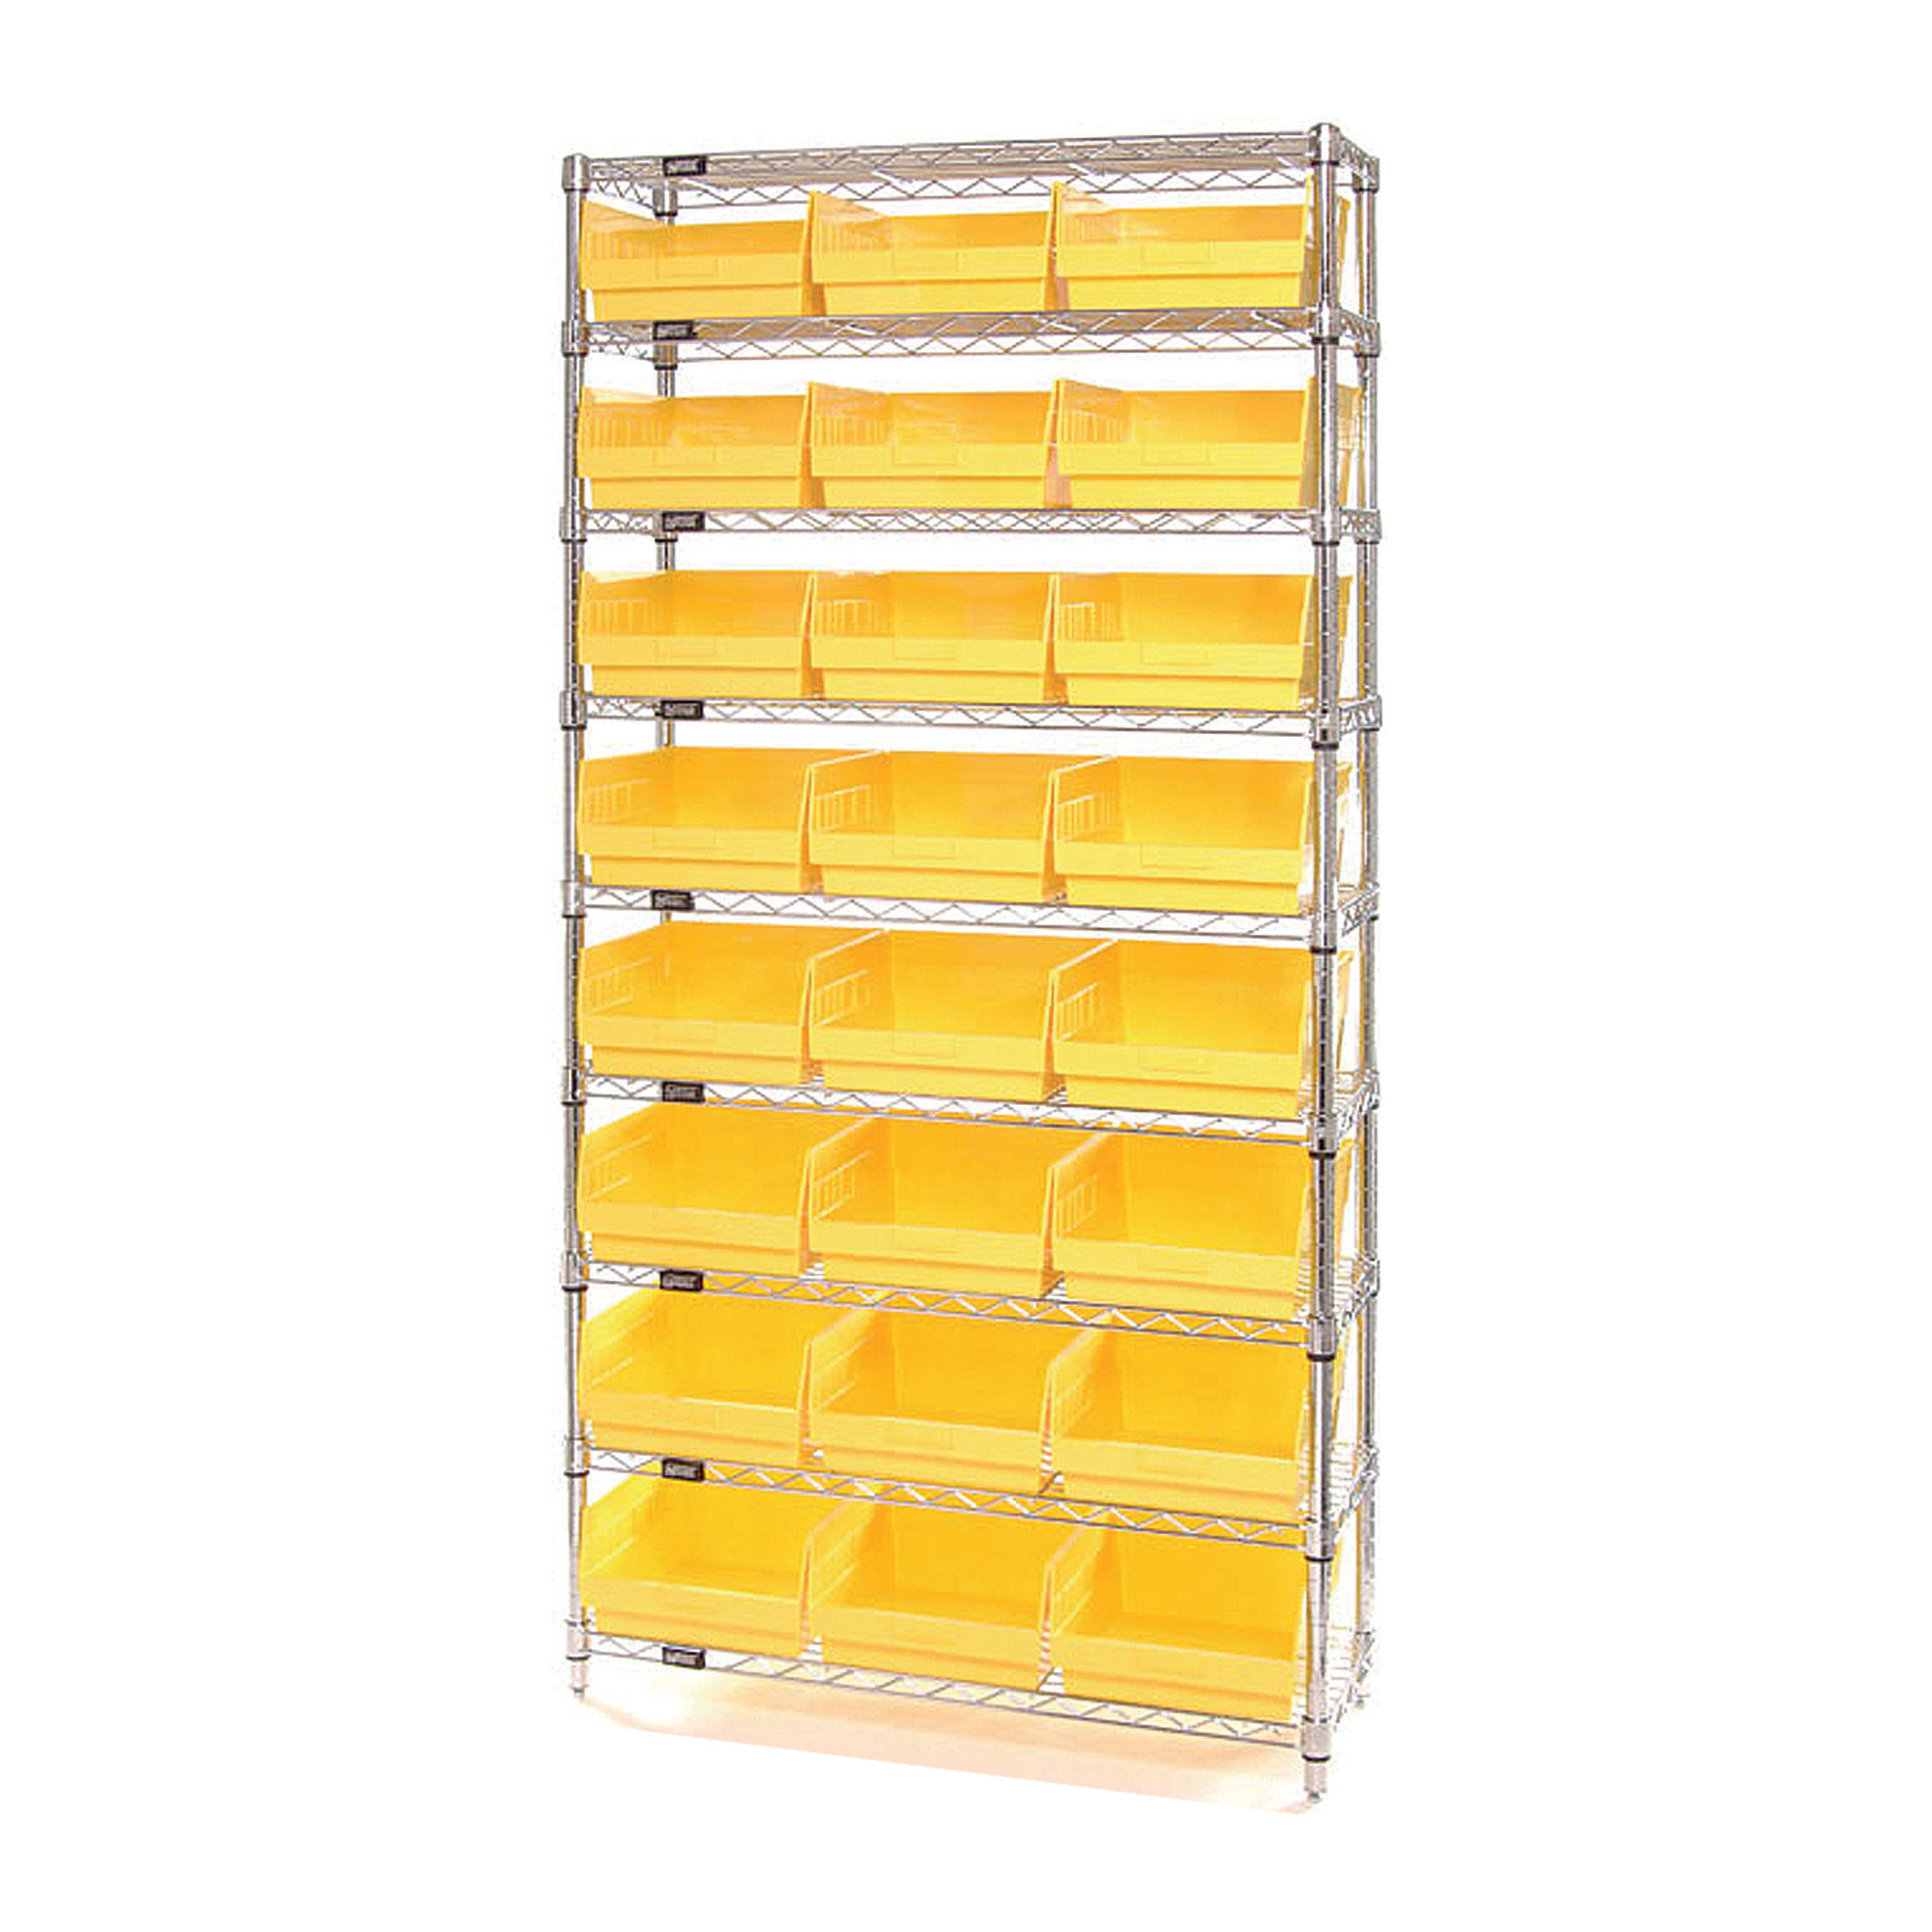 Storage Single Side Wire Chrome Shelving Unit with 24 Bins — 36Inch W x 12Inch D x 74Inch H, Yellow, Model - Quantum WR9-209YL